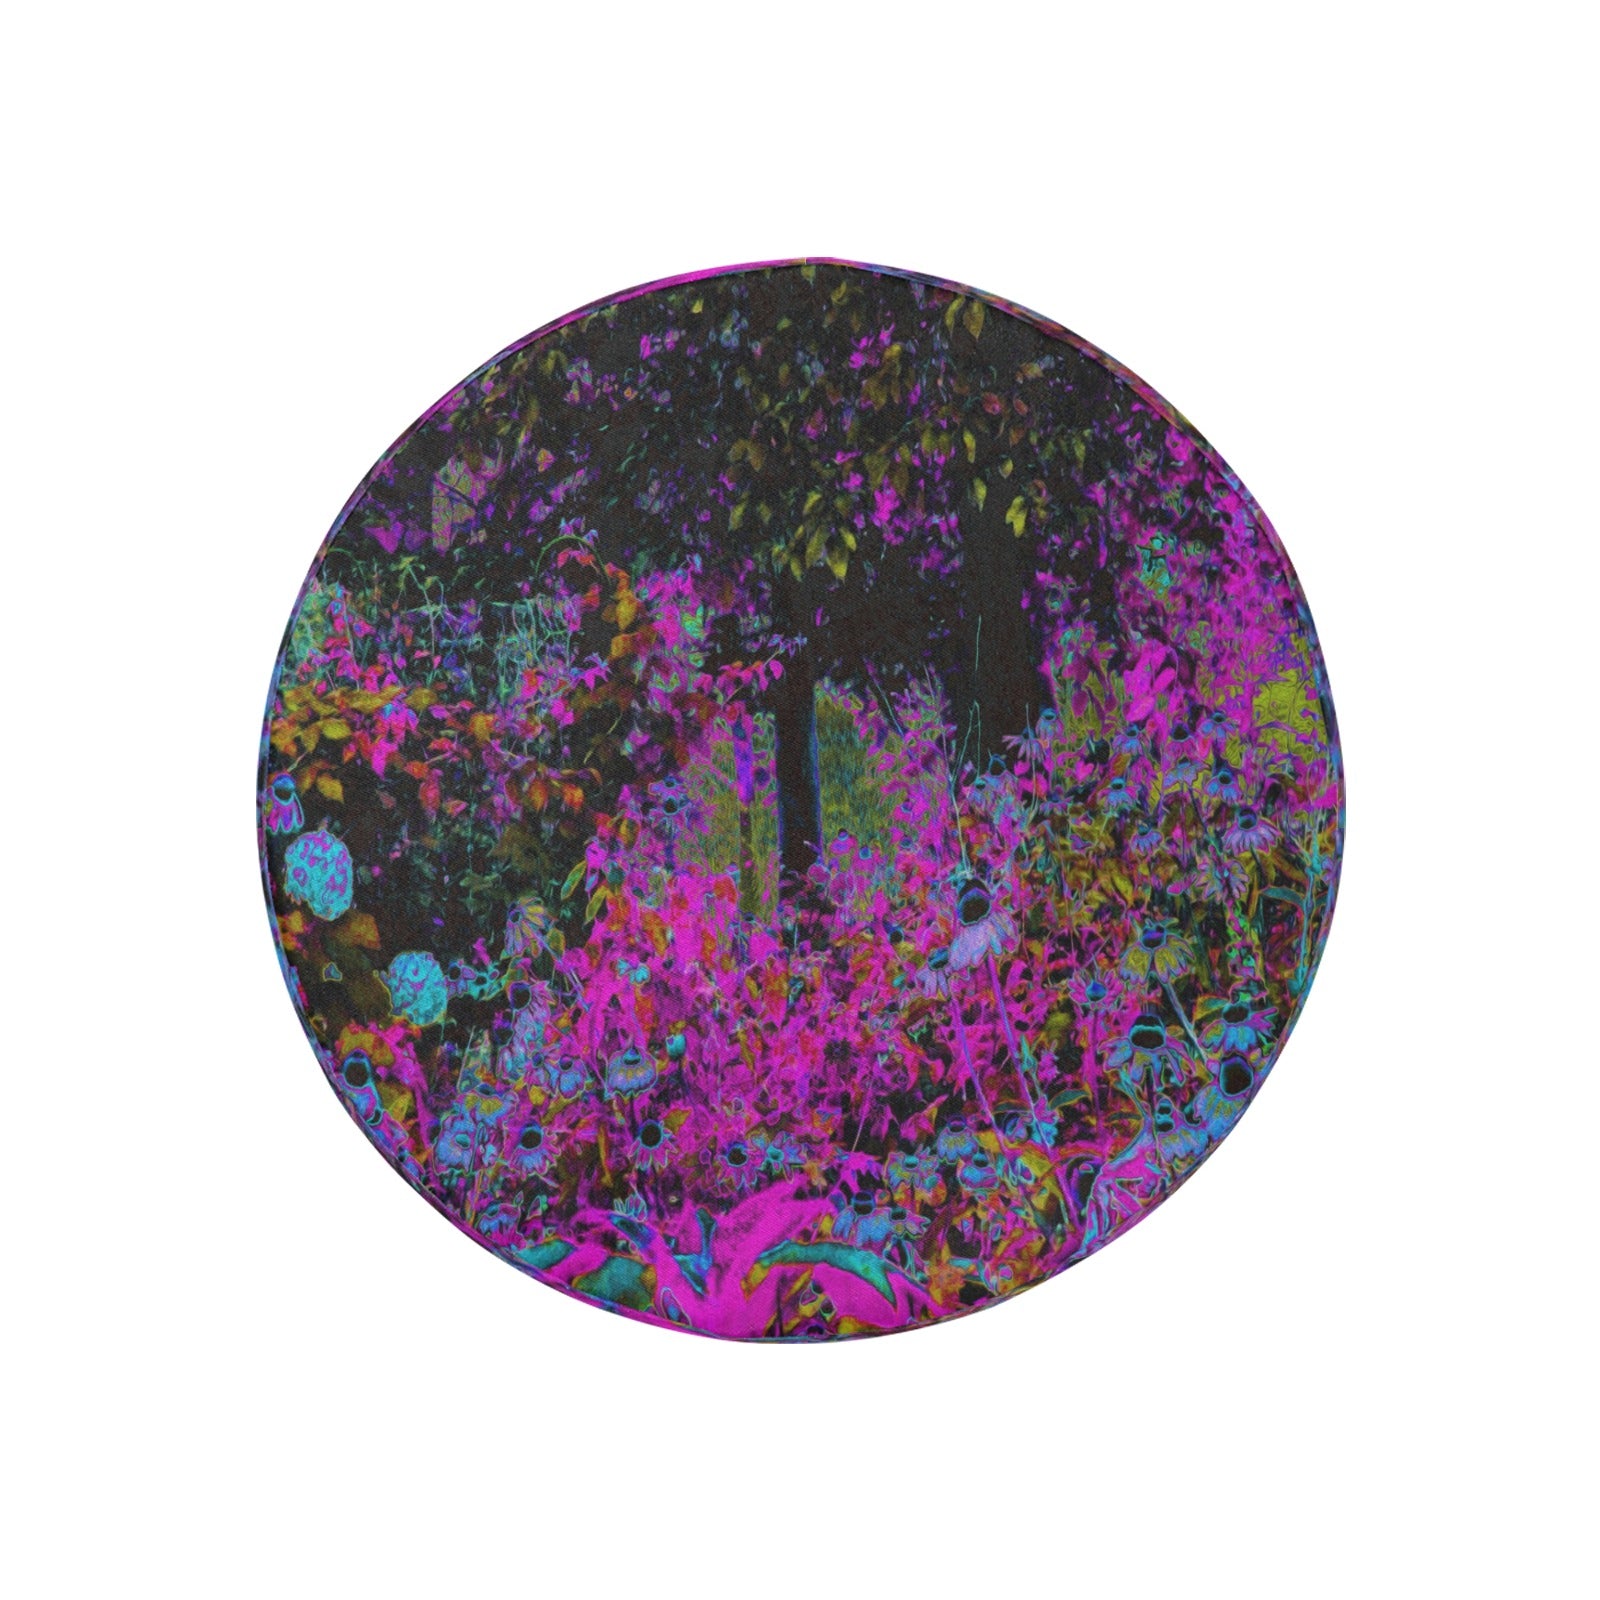 Spare Tire Covers, Psychedelic Hot Pink and Black Garden Sunrise - Small